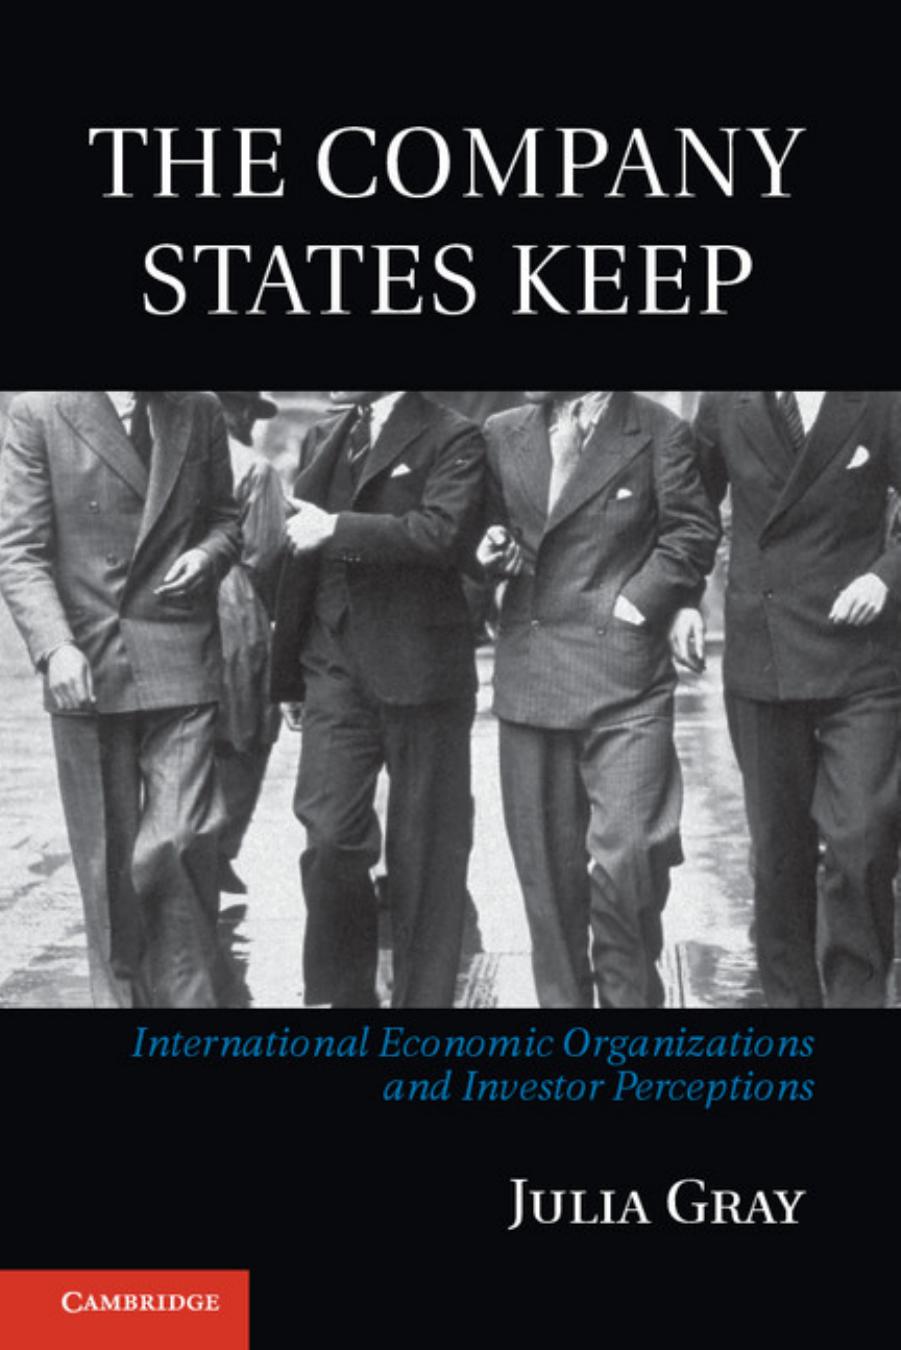 The Company States Keep : International Economic Organizations and Investor Perceptions by Julia Gray